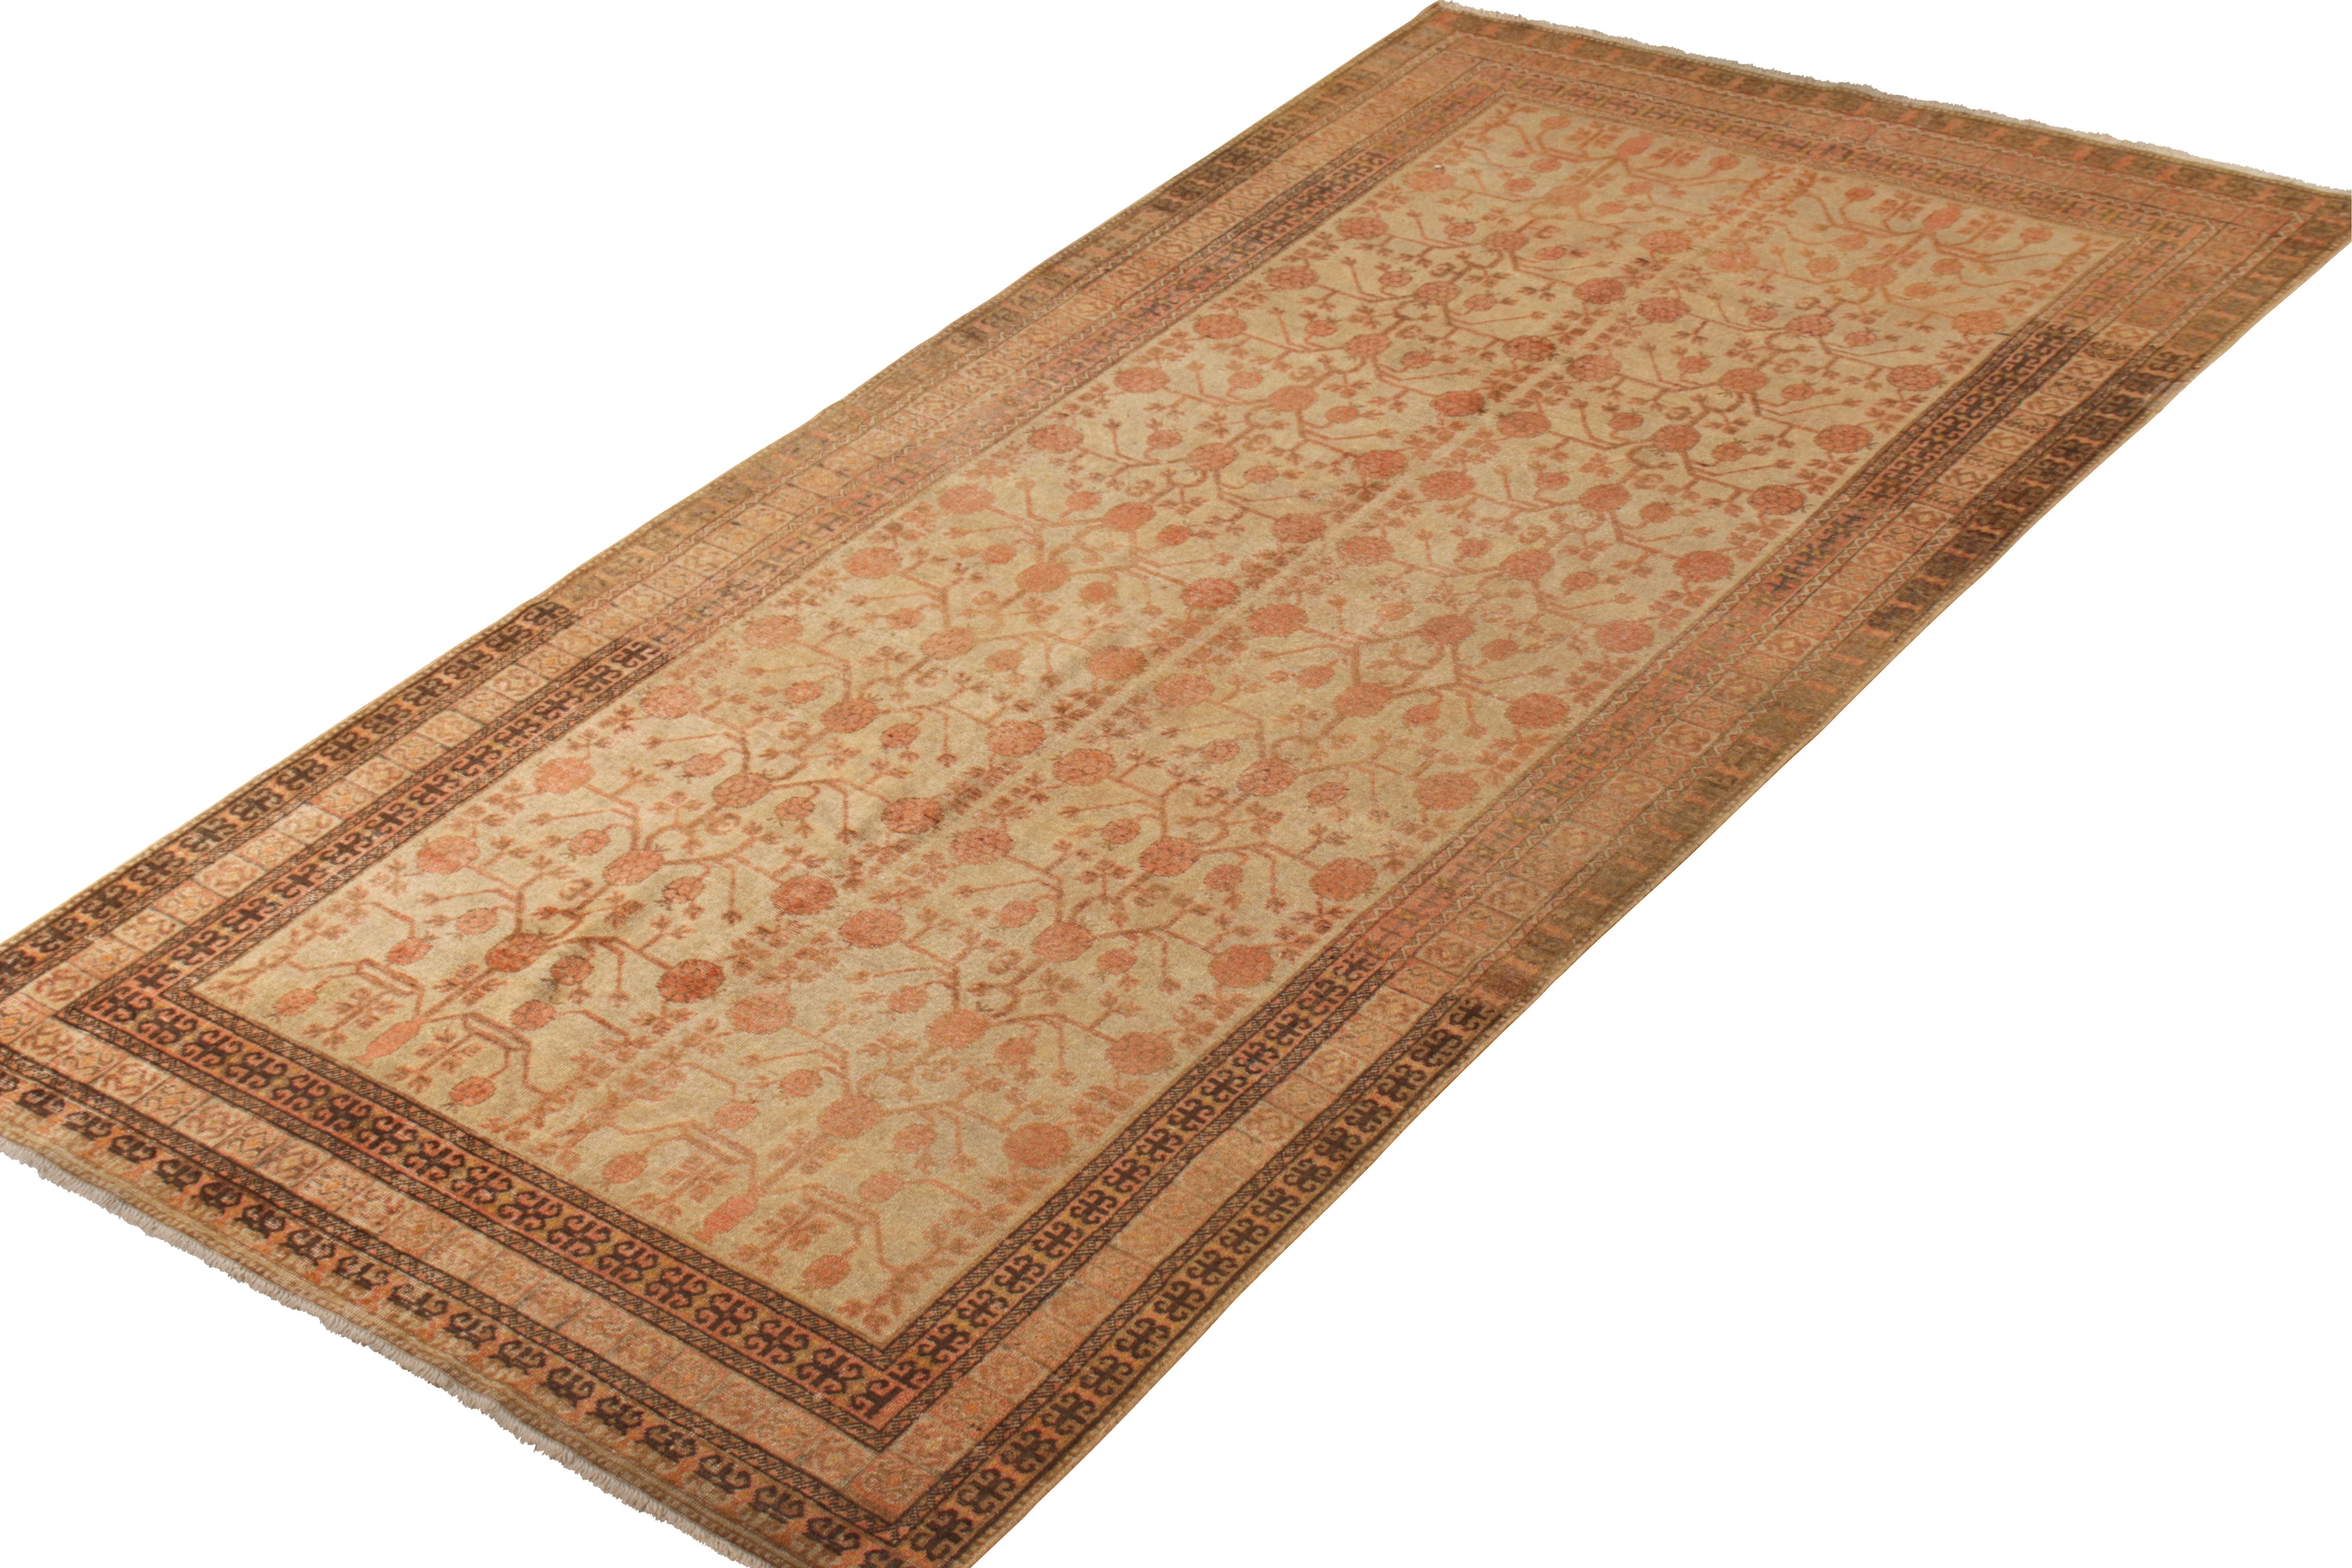 An antique 6 x 12 Khotan rug of a rare green background, playing with red and beige-brown in classic pomegranate patterns. A traditional design and celebrated pattern, hand knotted in a low-pile wool, originating from East Turkestan, circa